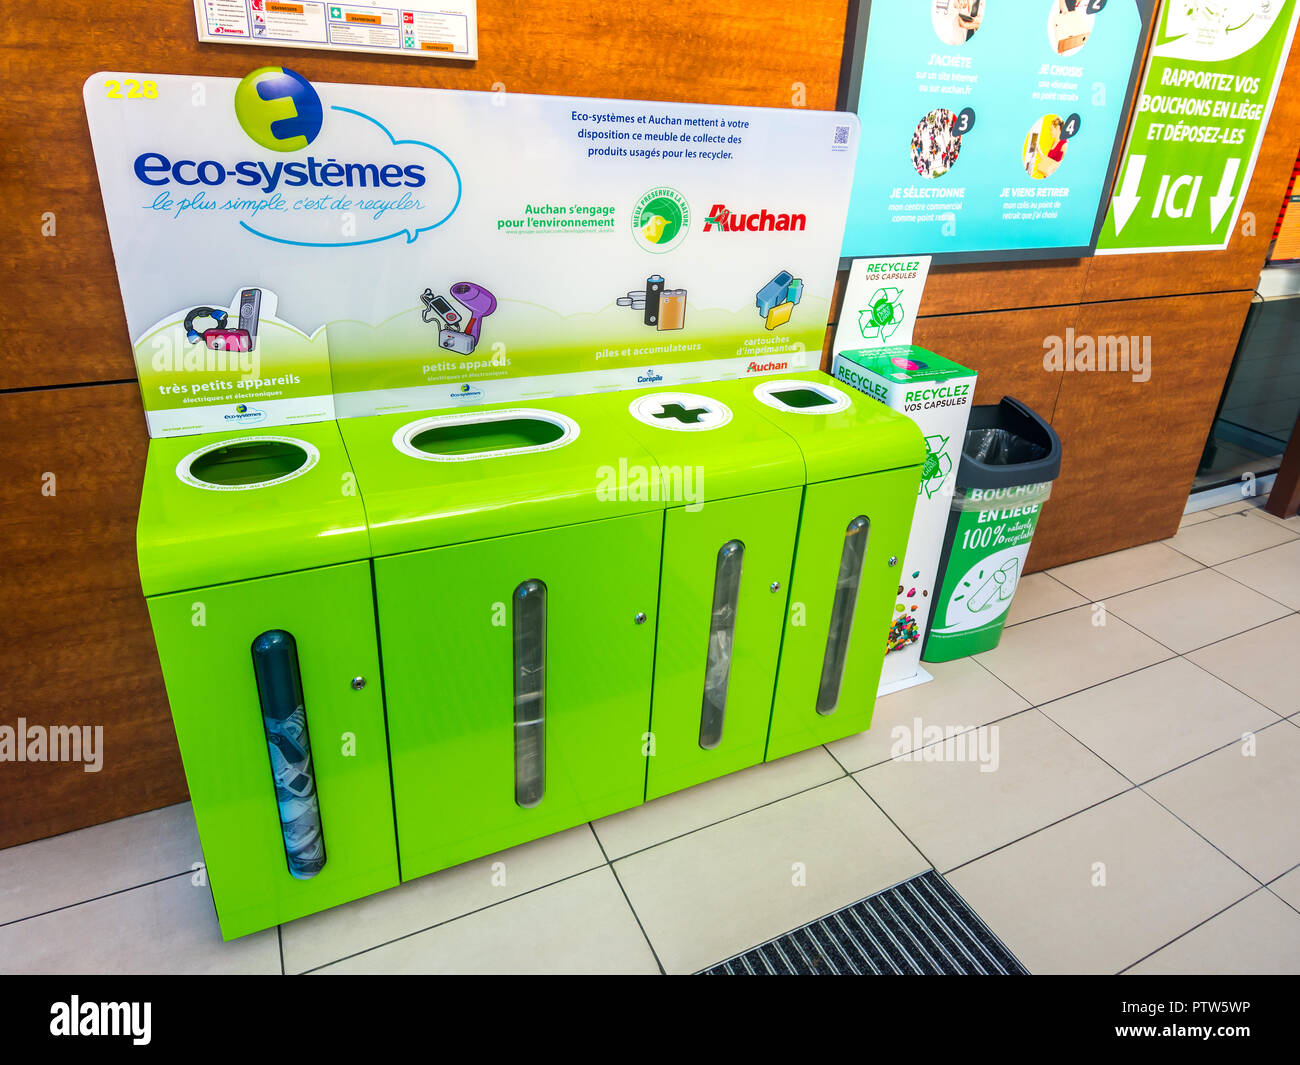 Recycling dispensers for batteries and surplus electrical goods - France. Stock Photo